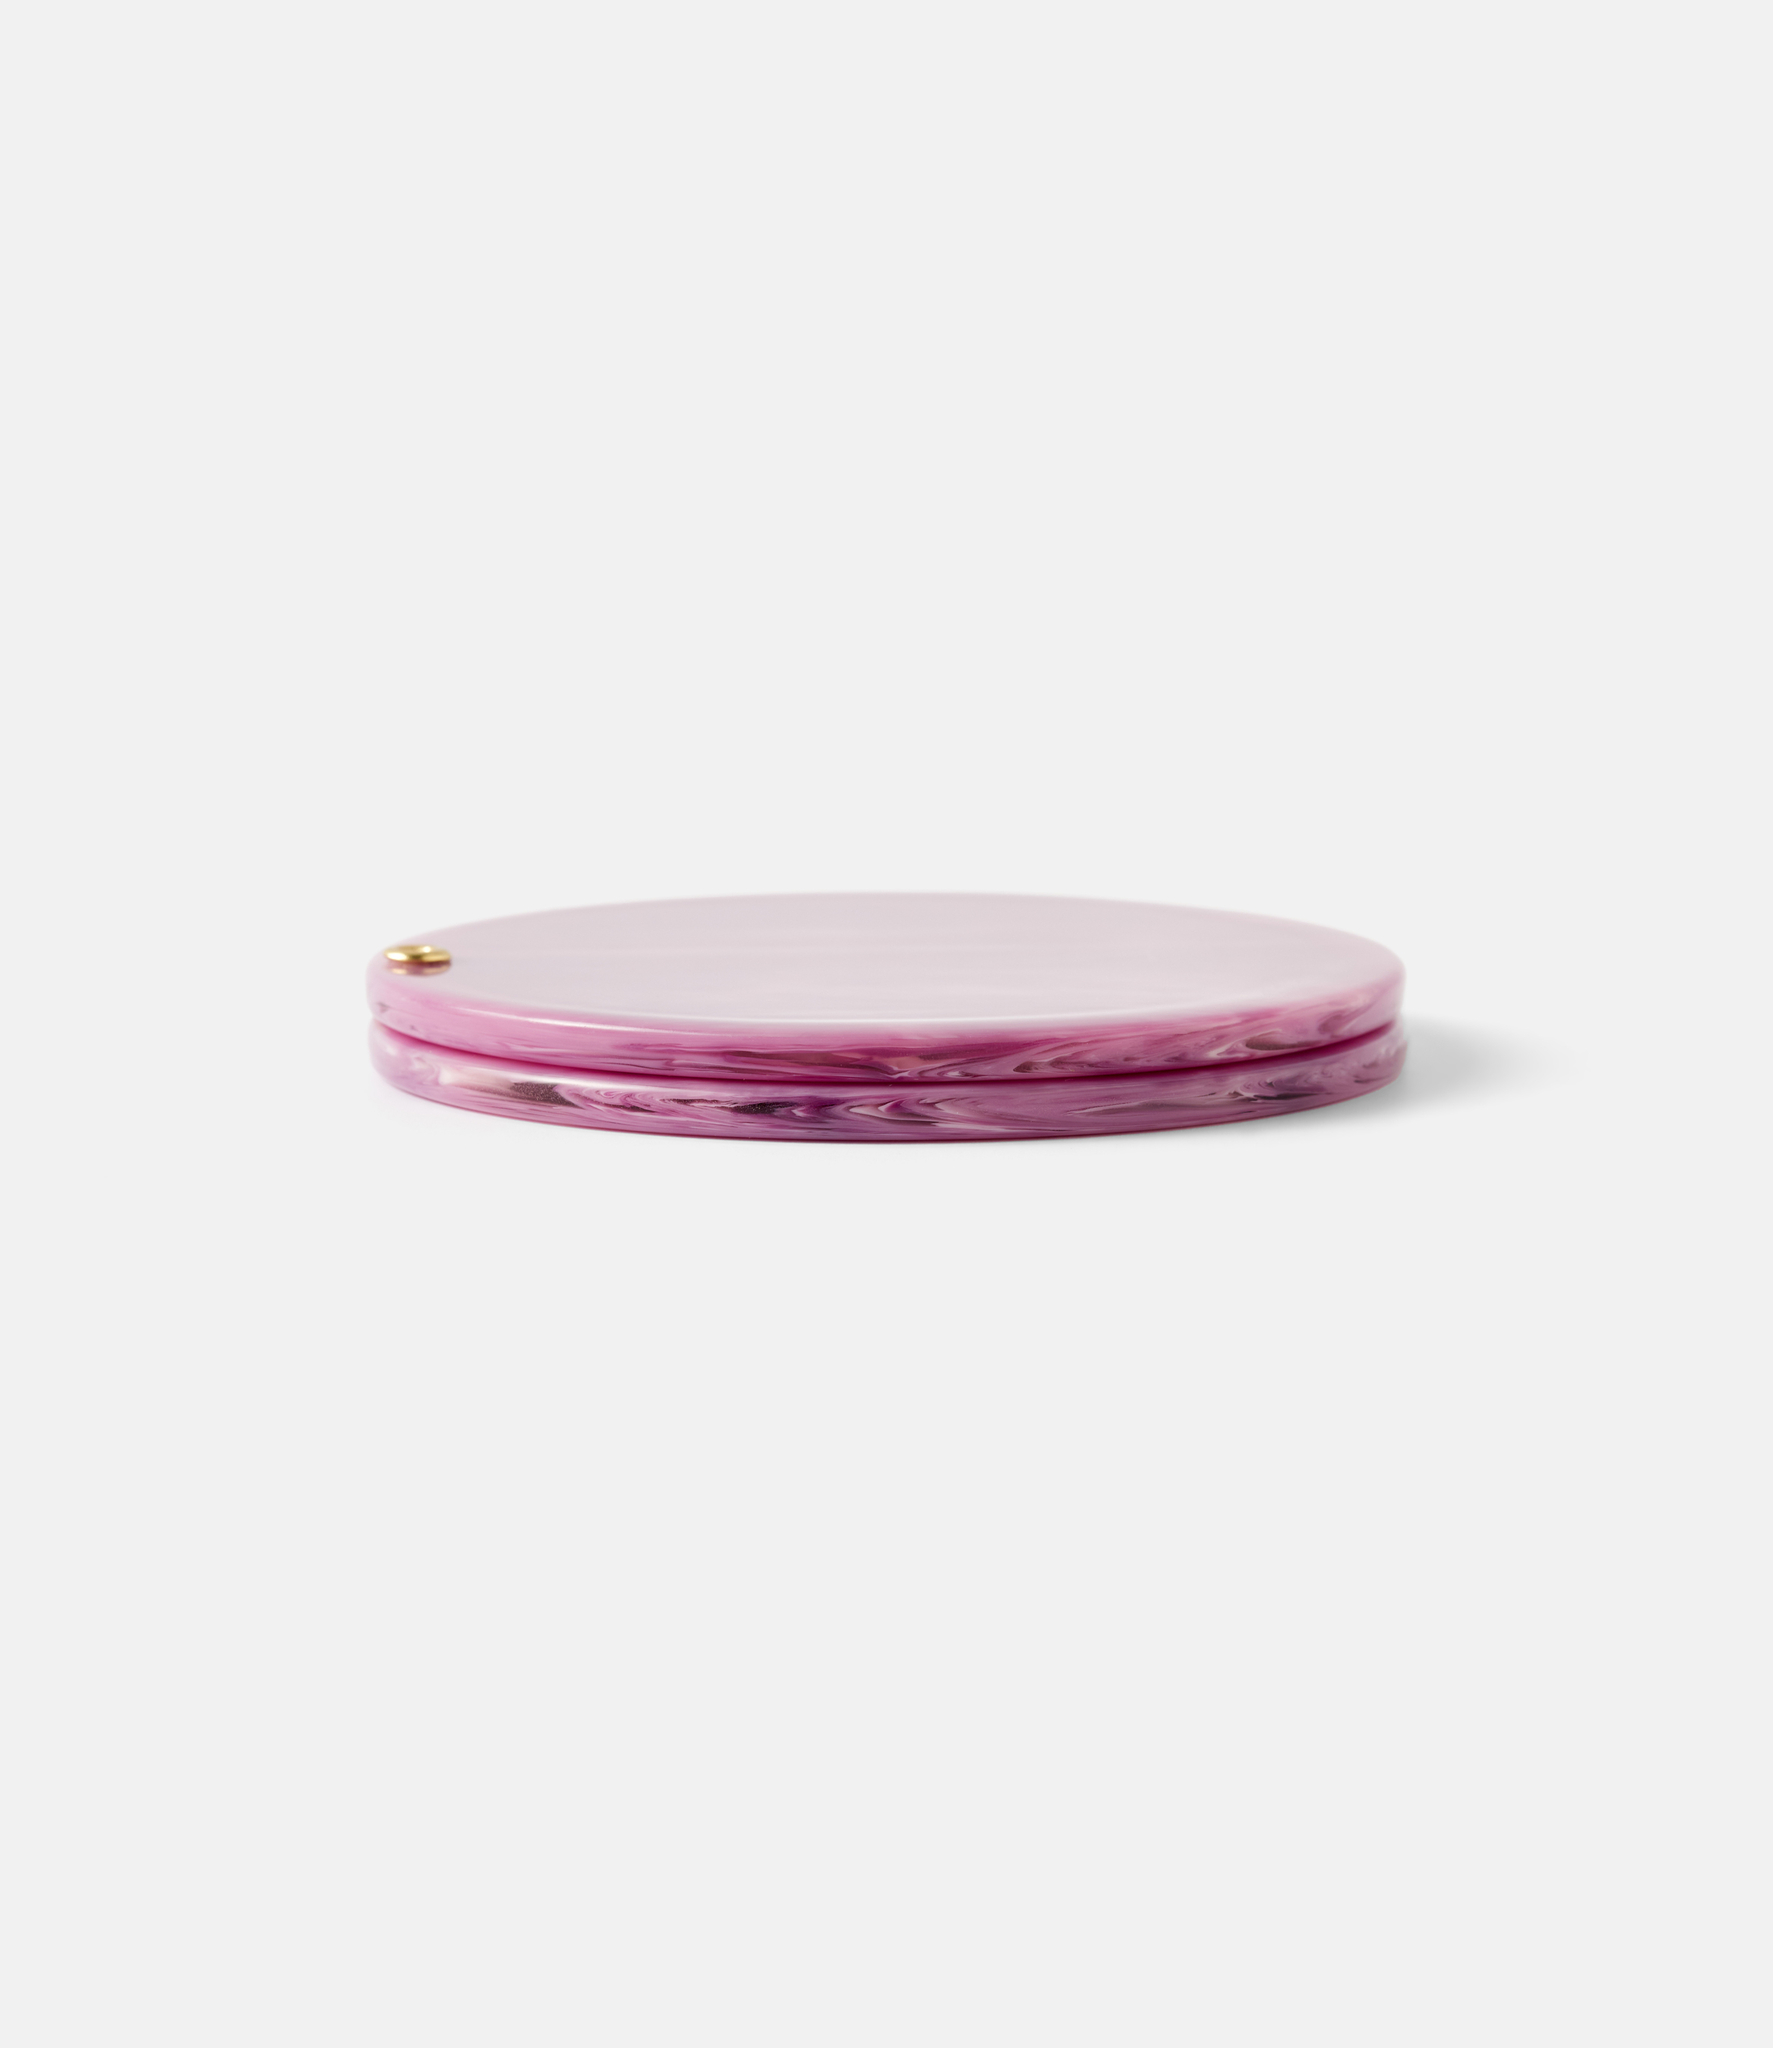 Machete Circle Mirror in Orchid — карманное зеркало из ацетата